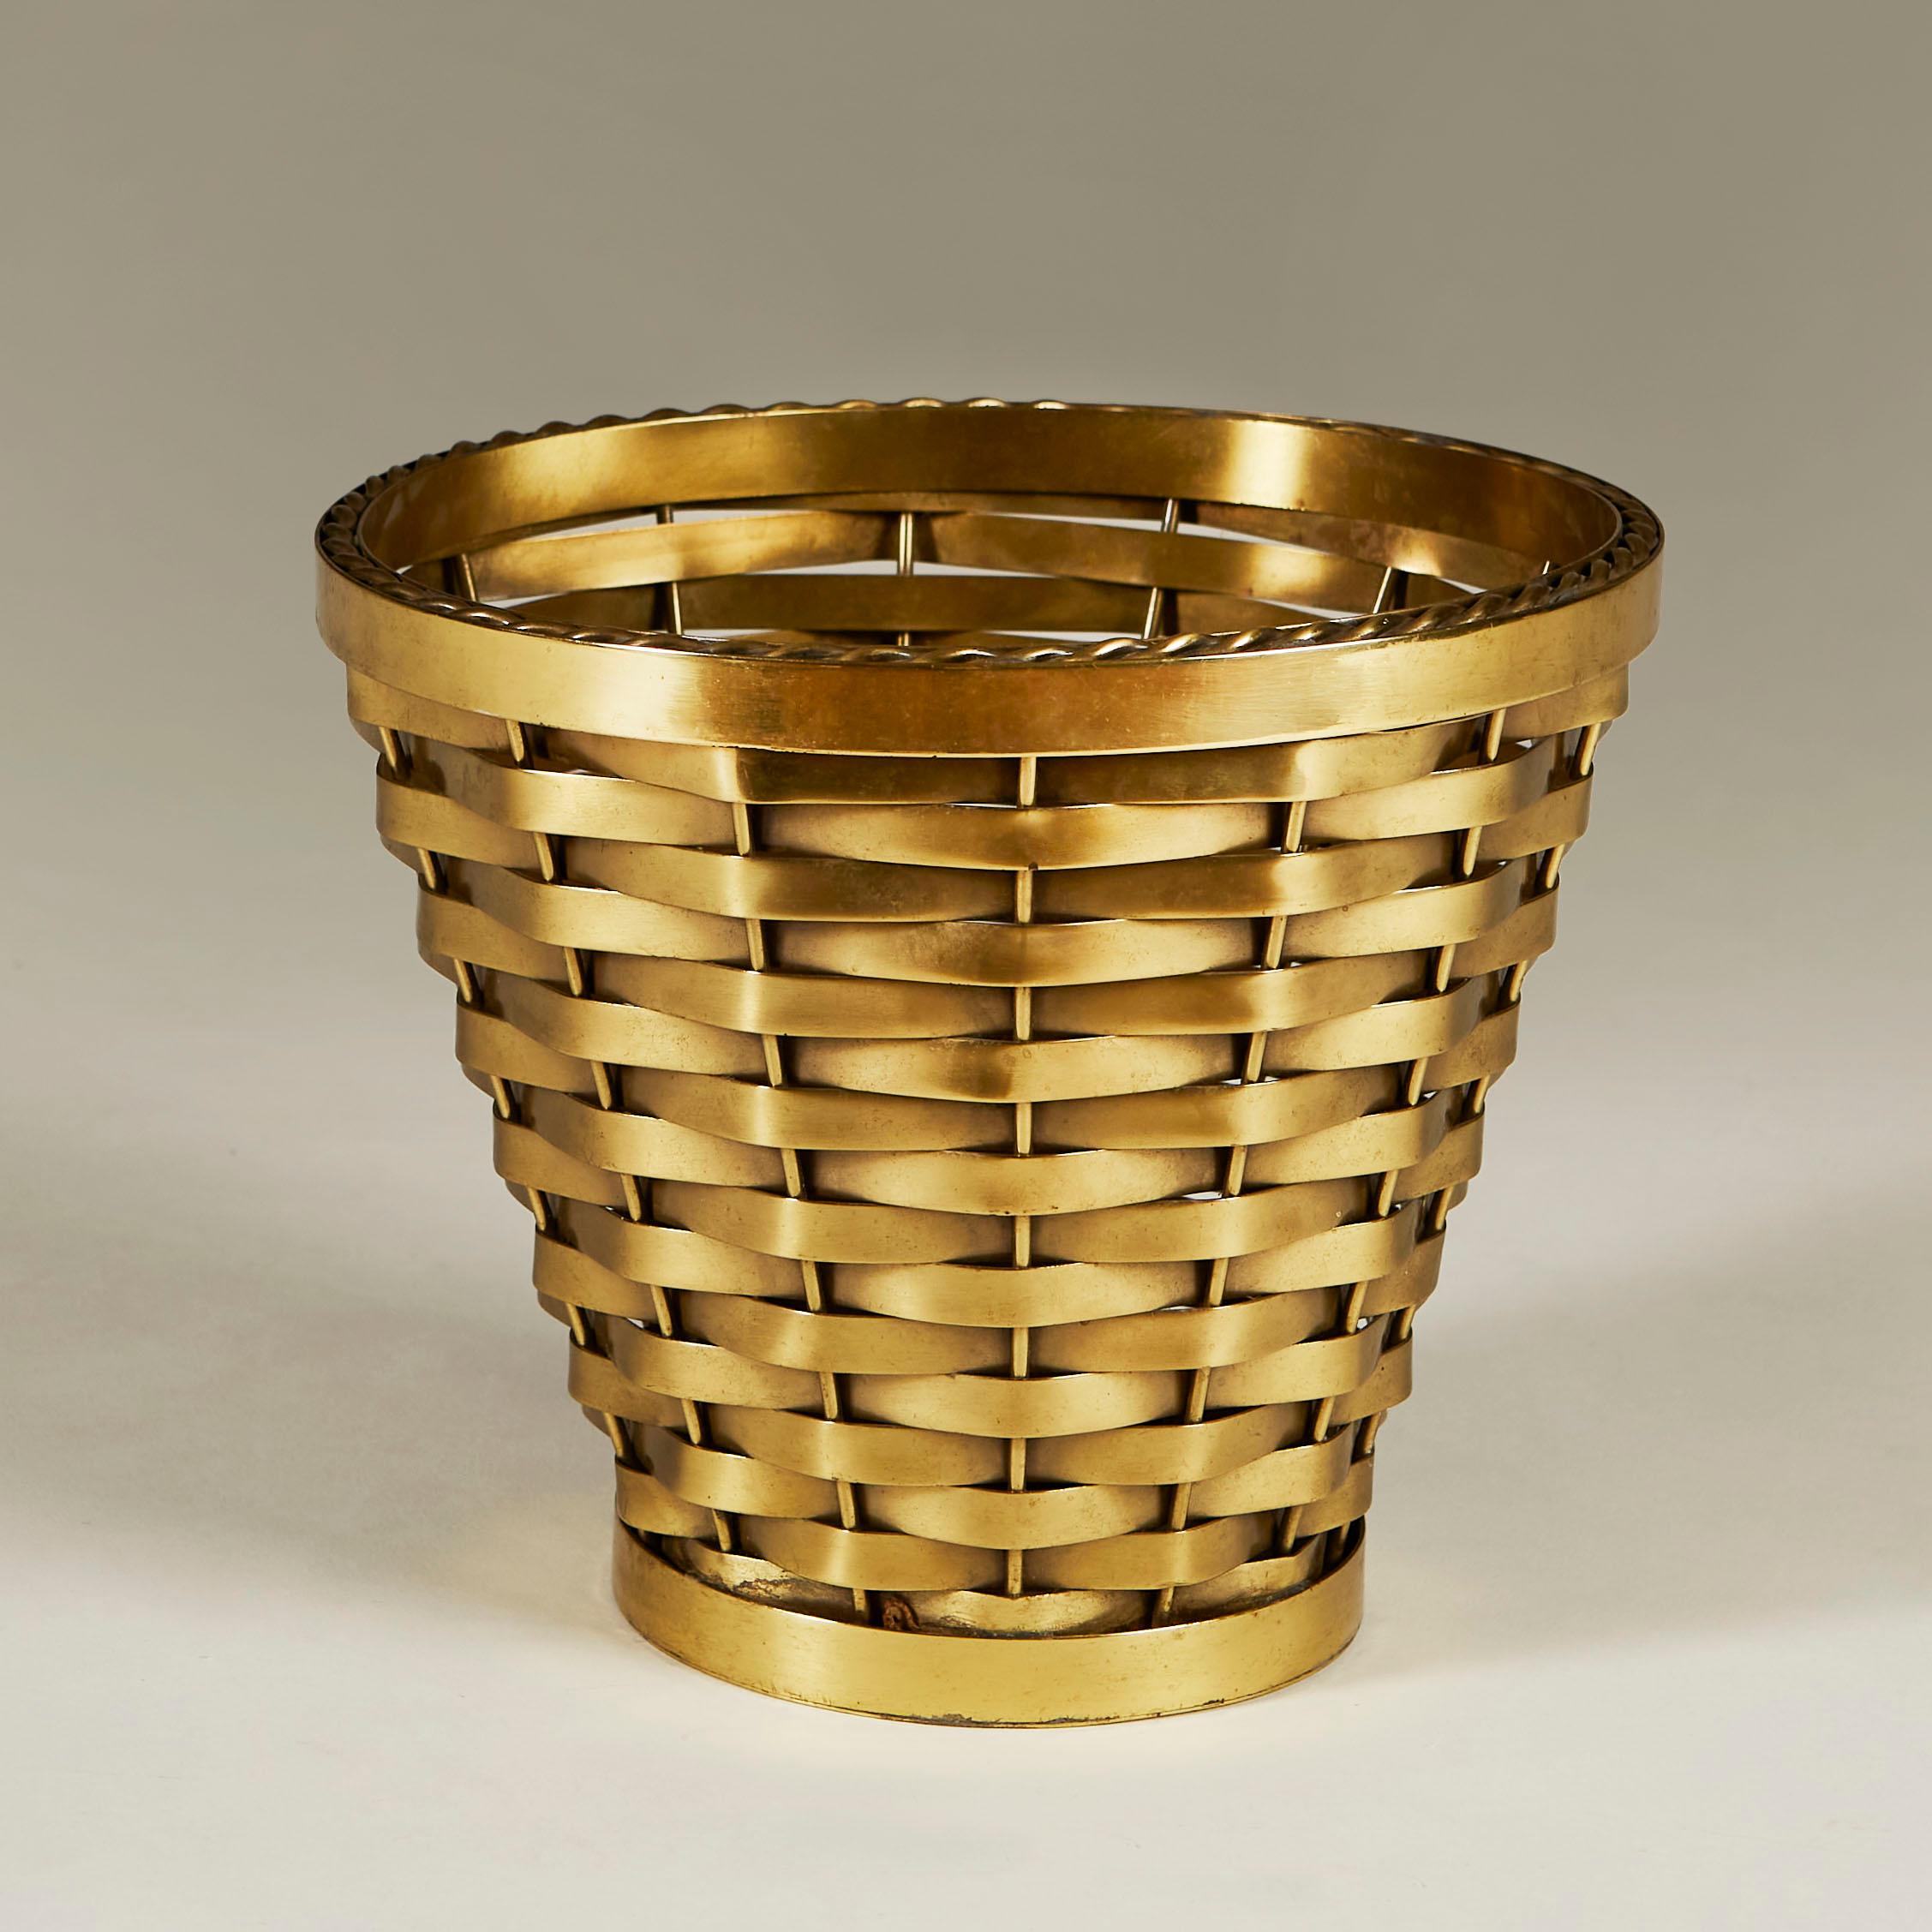 Chic tapered waste paper bin with woven brass lattice design edged with brass rope rim.
  